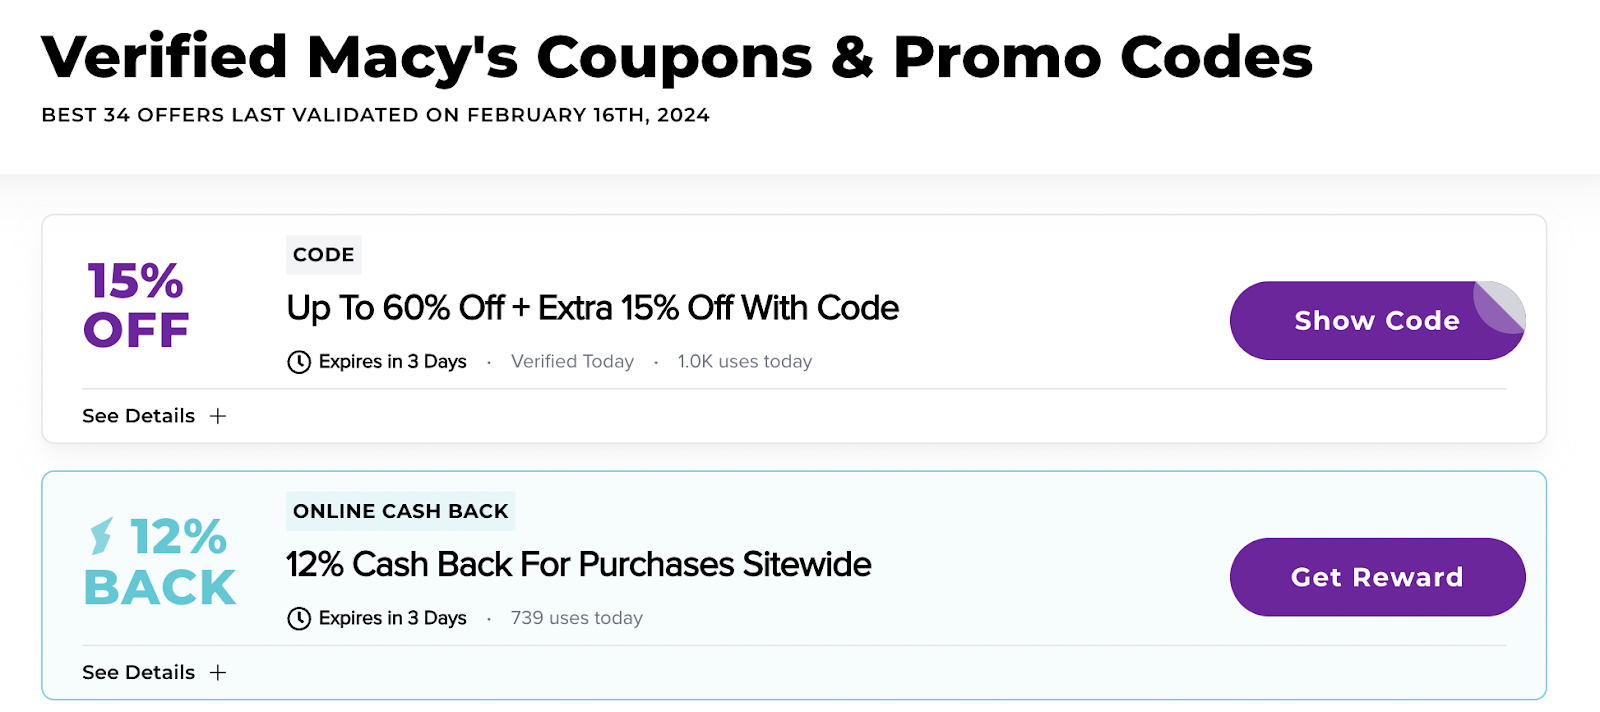 10% Off Hanes Promo Codes, Coupons + 8% Cash Back